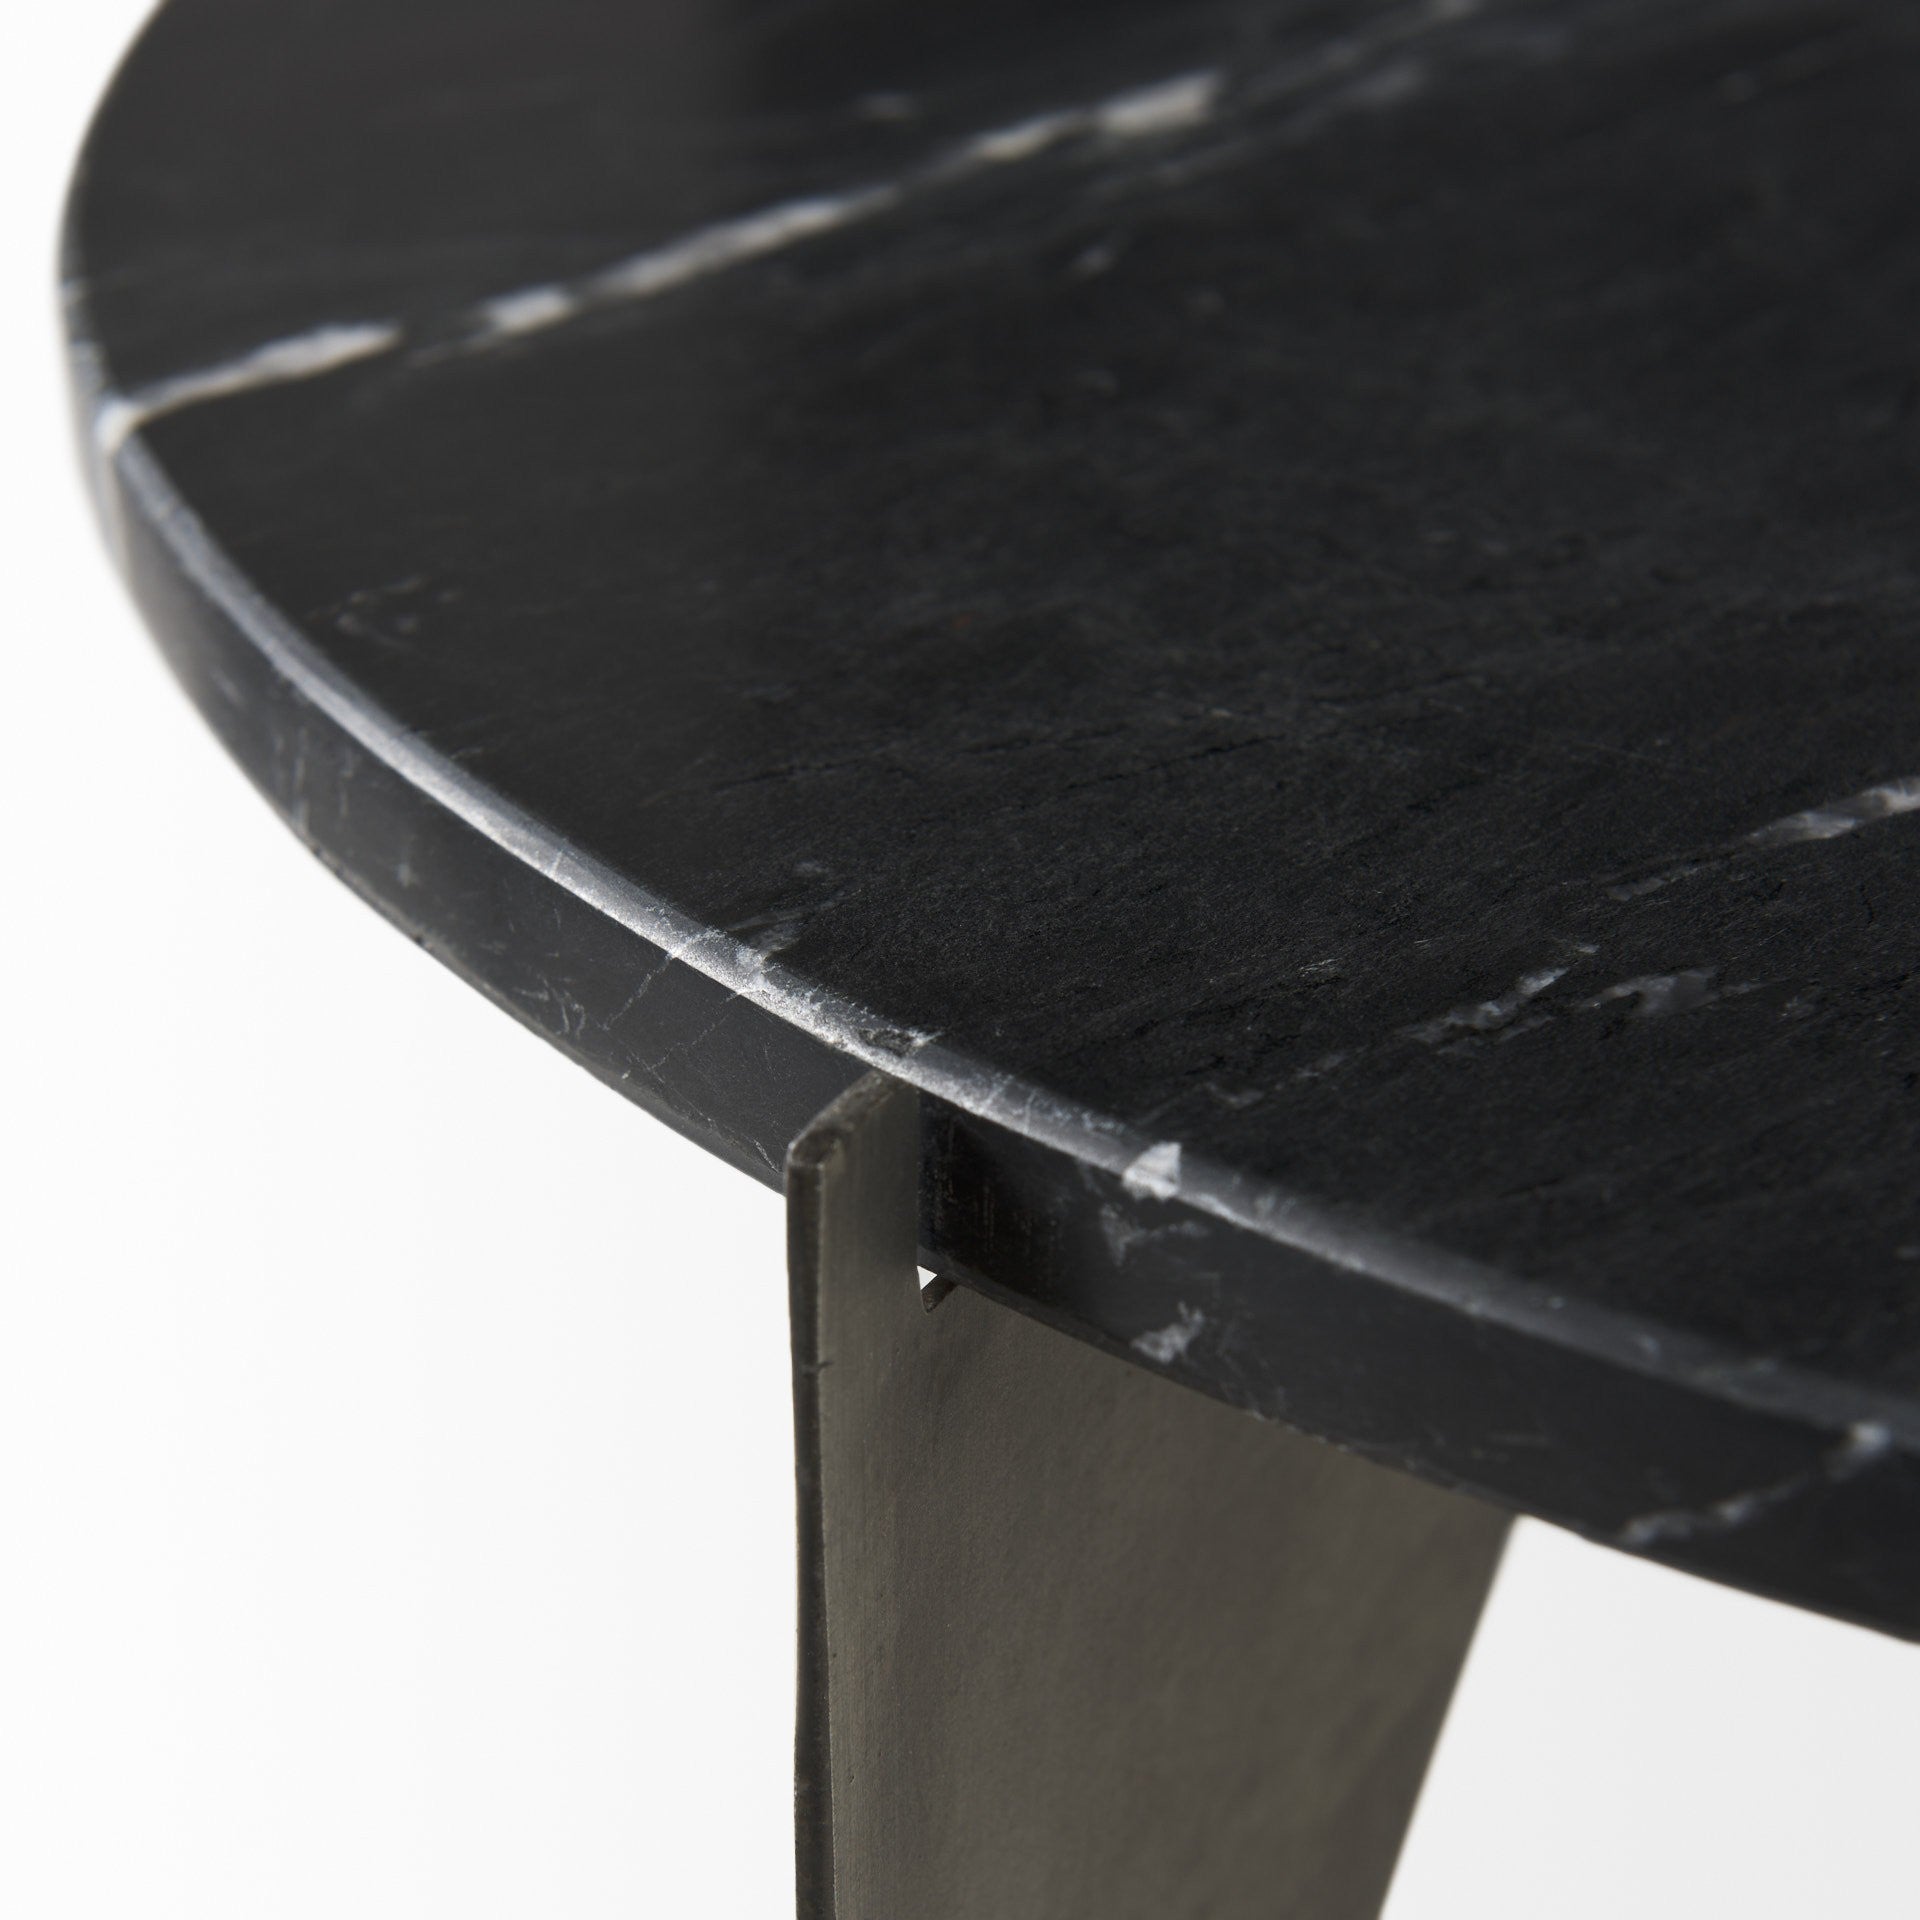 20" Black Marble Round End Table